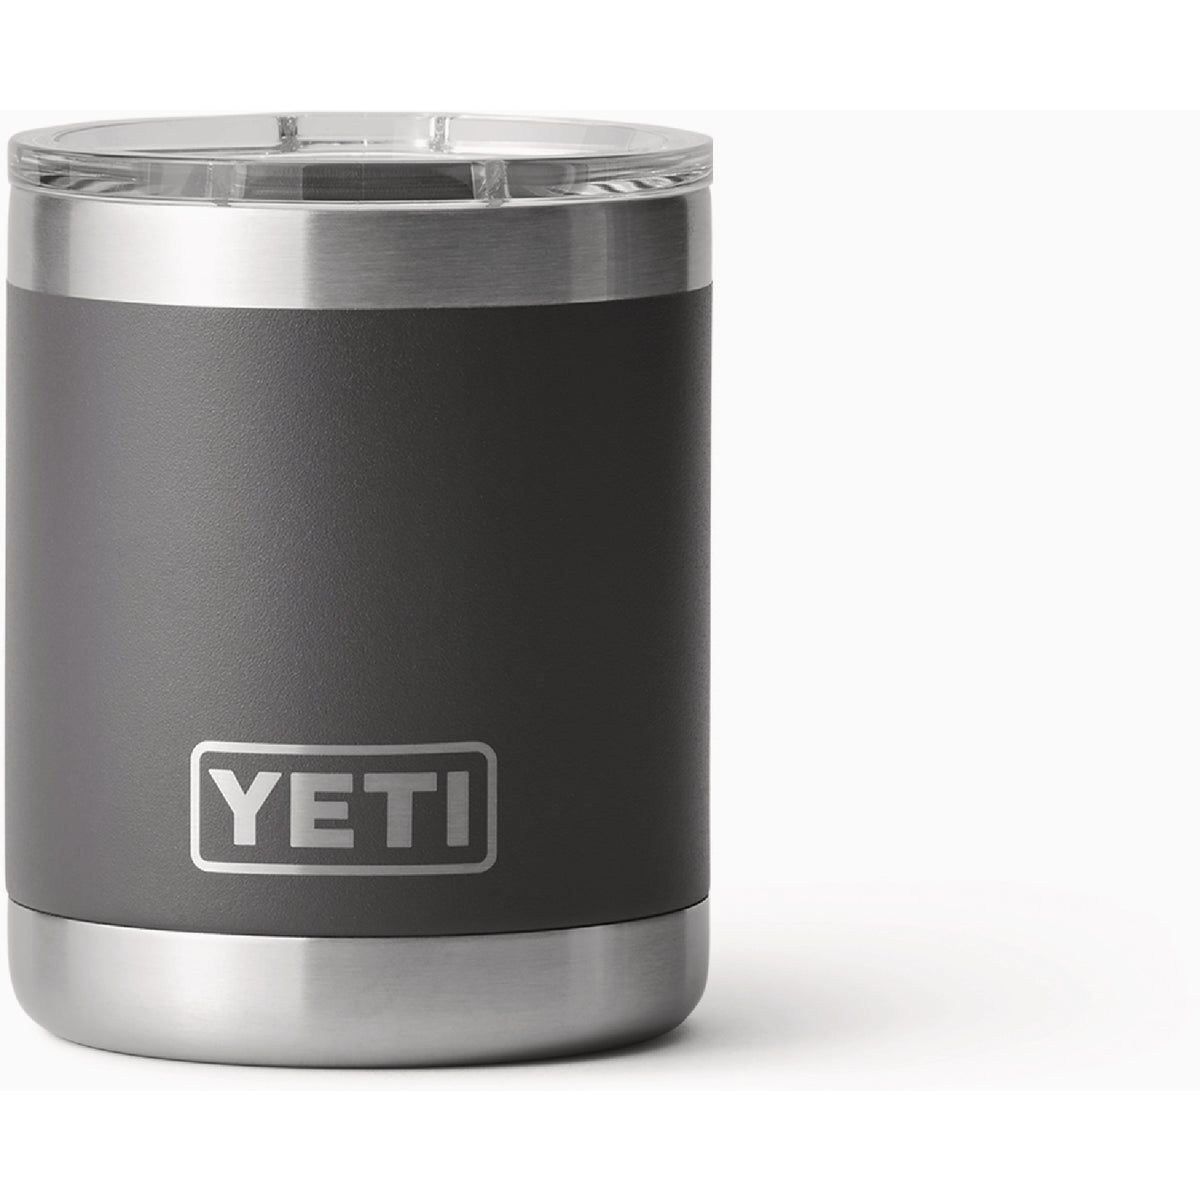 YETI Rambler 10 oz Tumbler, Stainless Steel, Vacuum Insulated with  MagSlider Lid, Charcoal